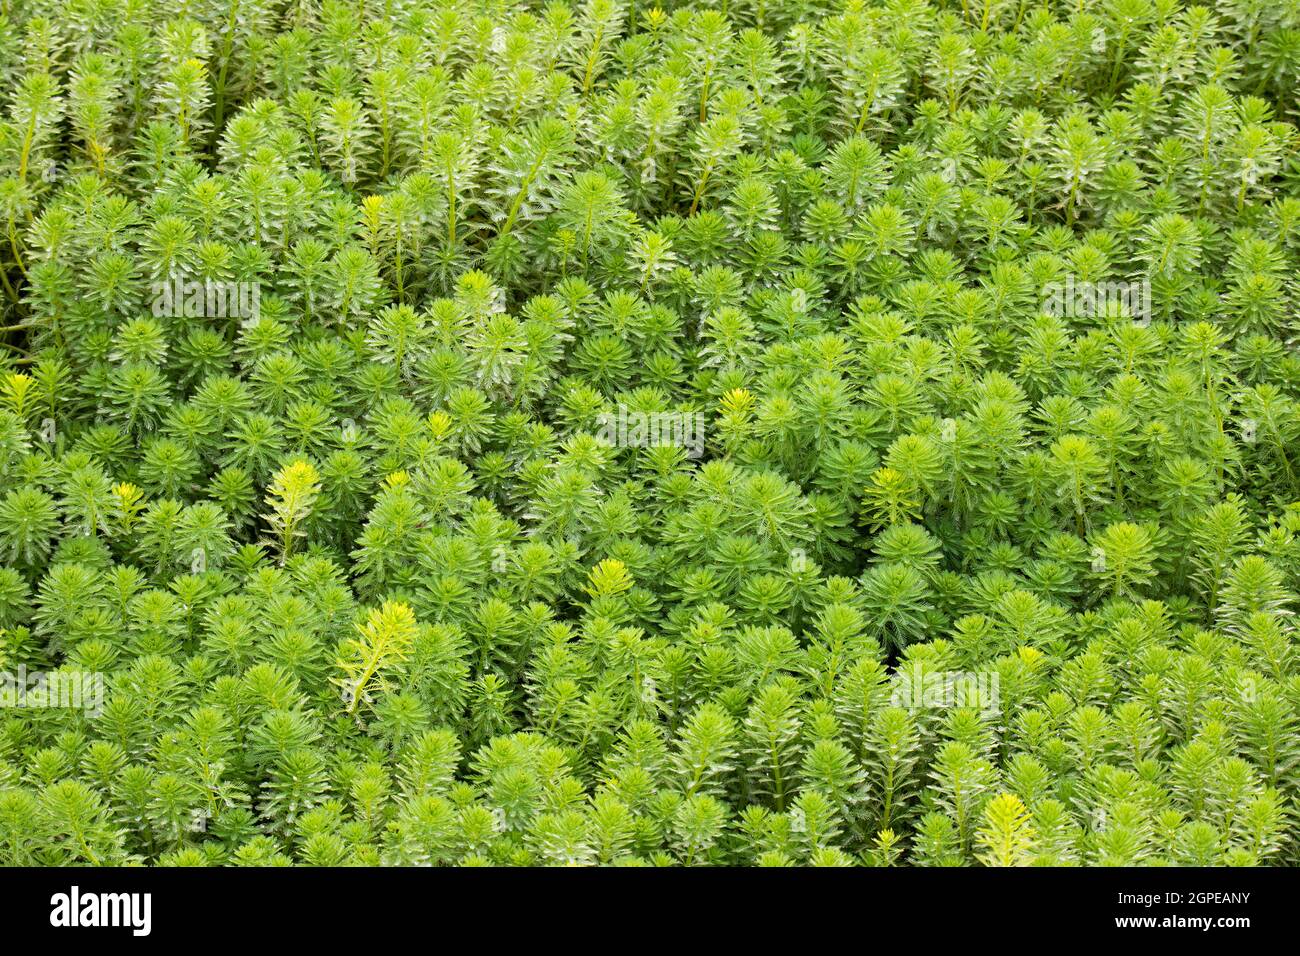 background of green herbal plants that grow in swamps and ponds Stock Photo